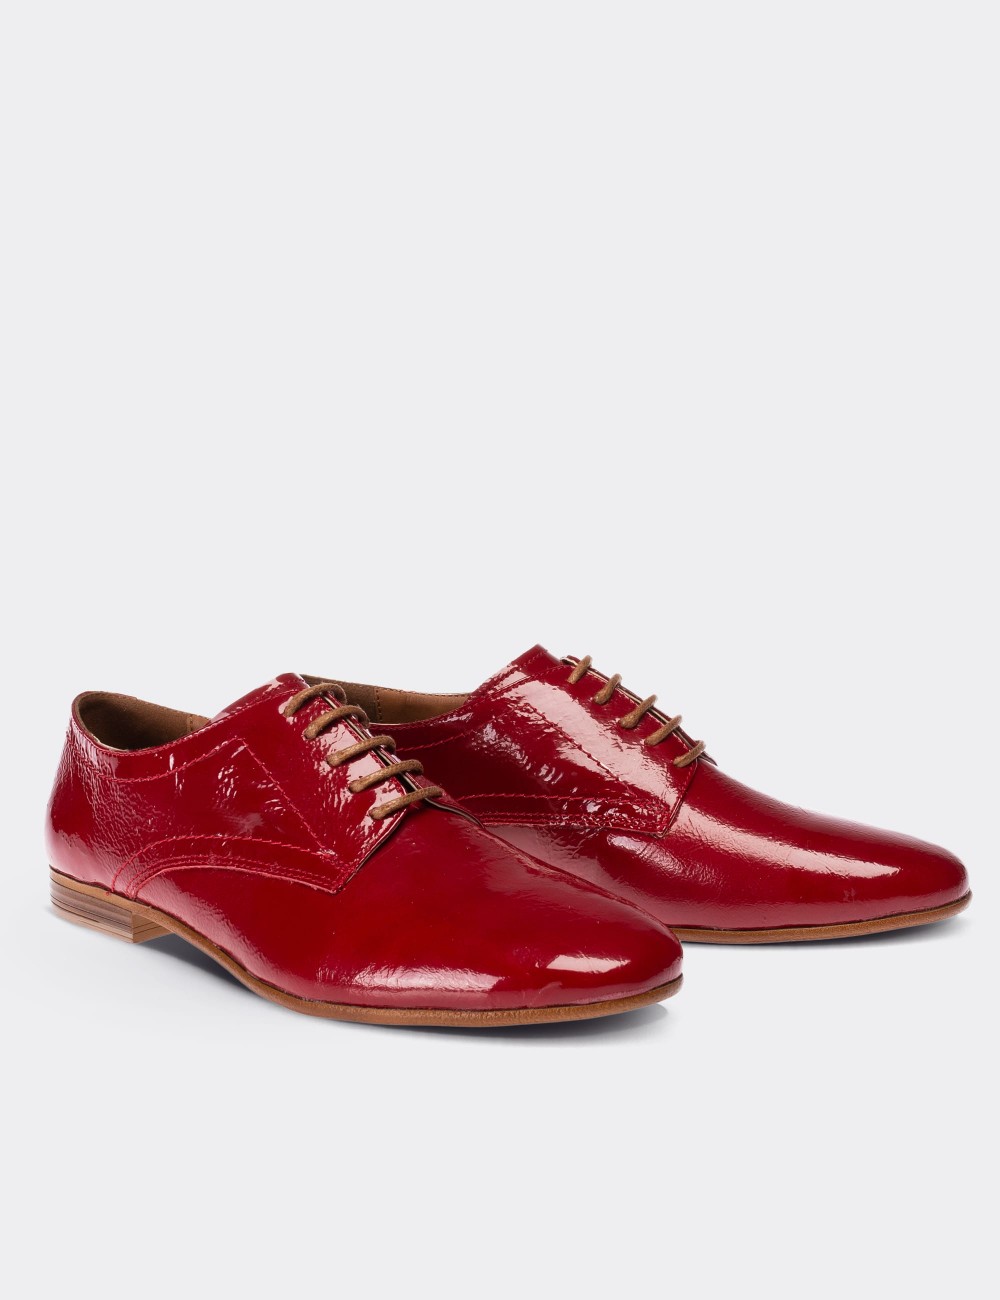 Red Patent Leather Lace-up Shoes - 01430ZKRMC02